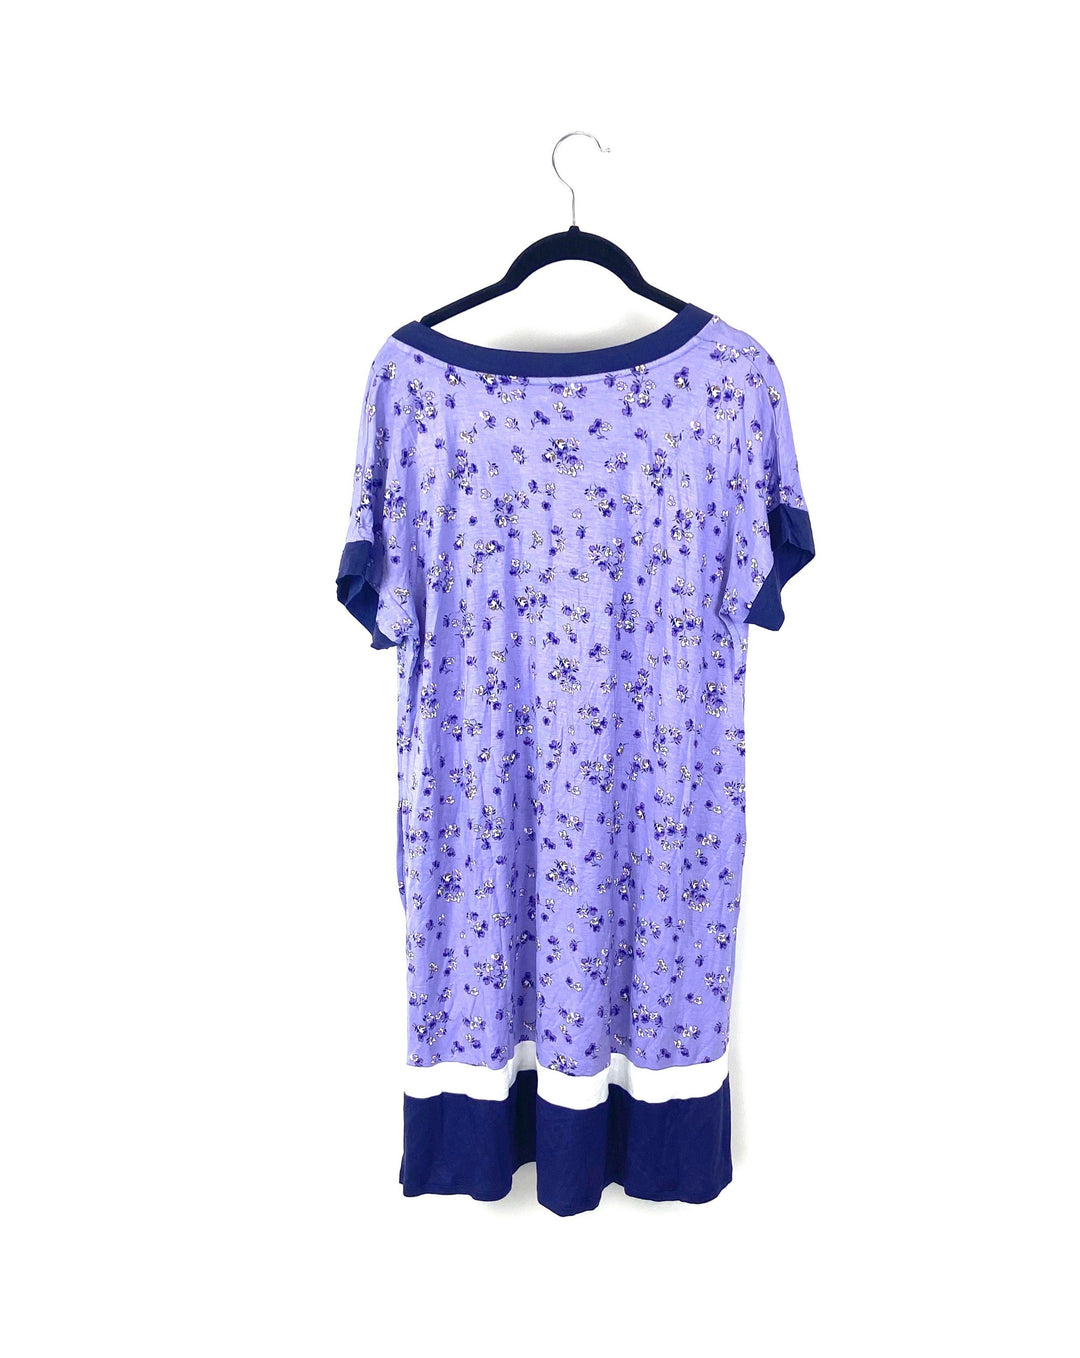 Purple Floral Nightgown - Small